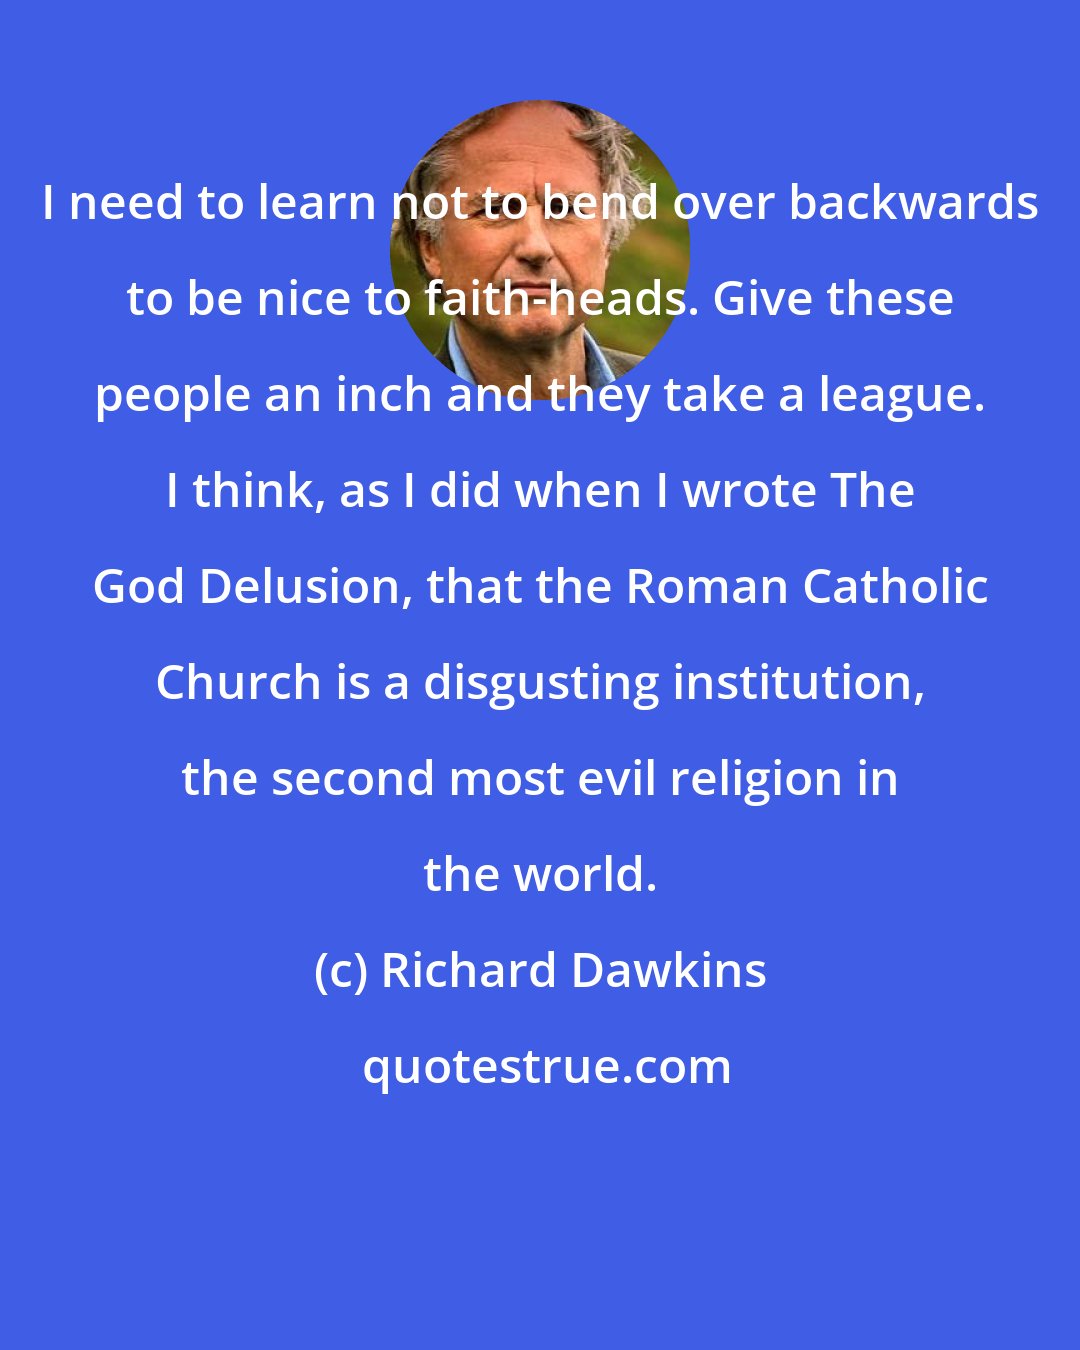 Richard Dawkins: I need to learn not to bend over backwards to be nice to faith-heads. Give these people an inch and they take a league. I think, as I did when I wrote The God Delusion, that the Roman Catholic Church is a disgusting institution, the second most evil religion in the world.